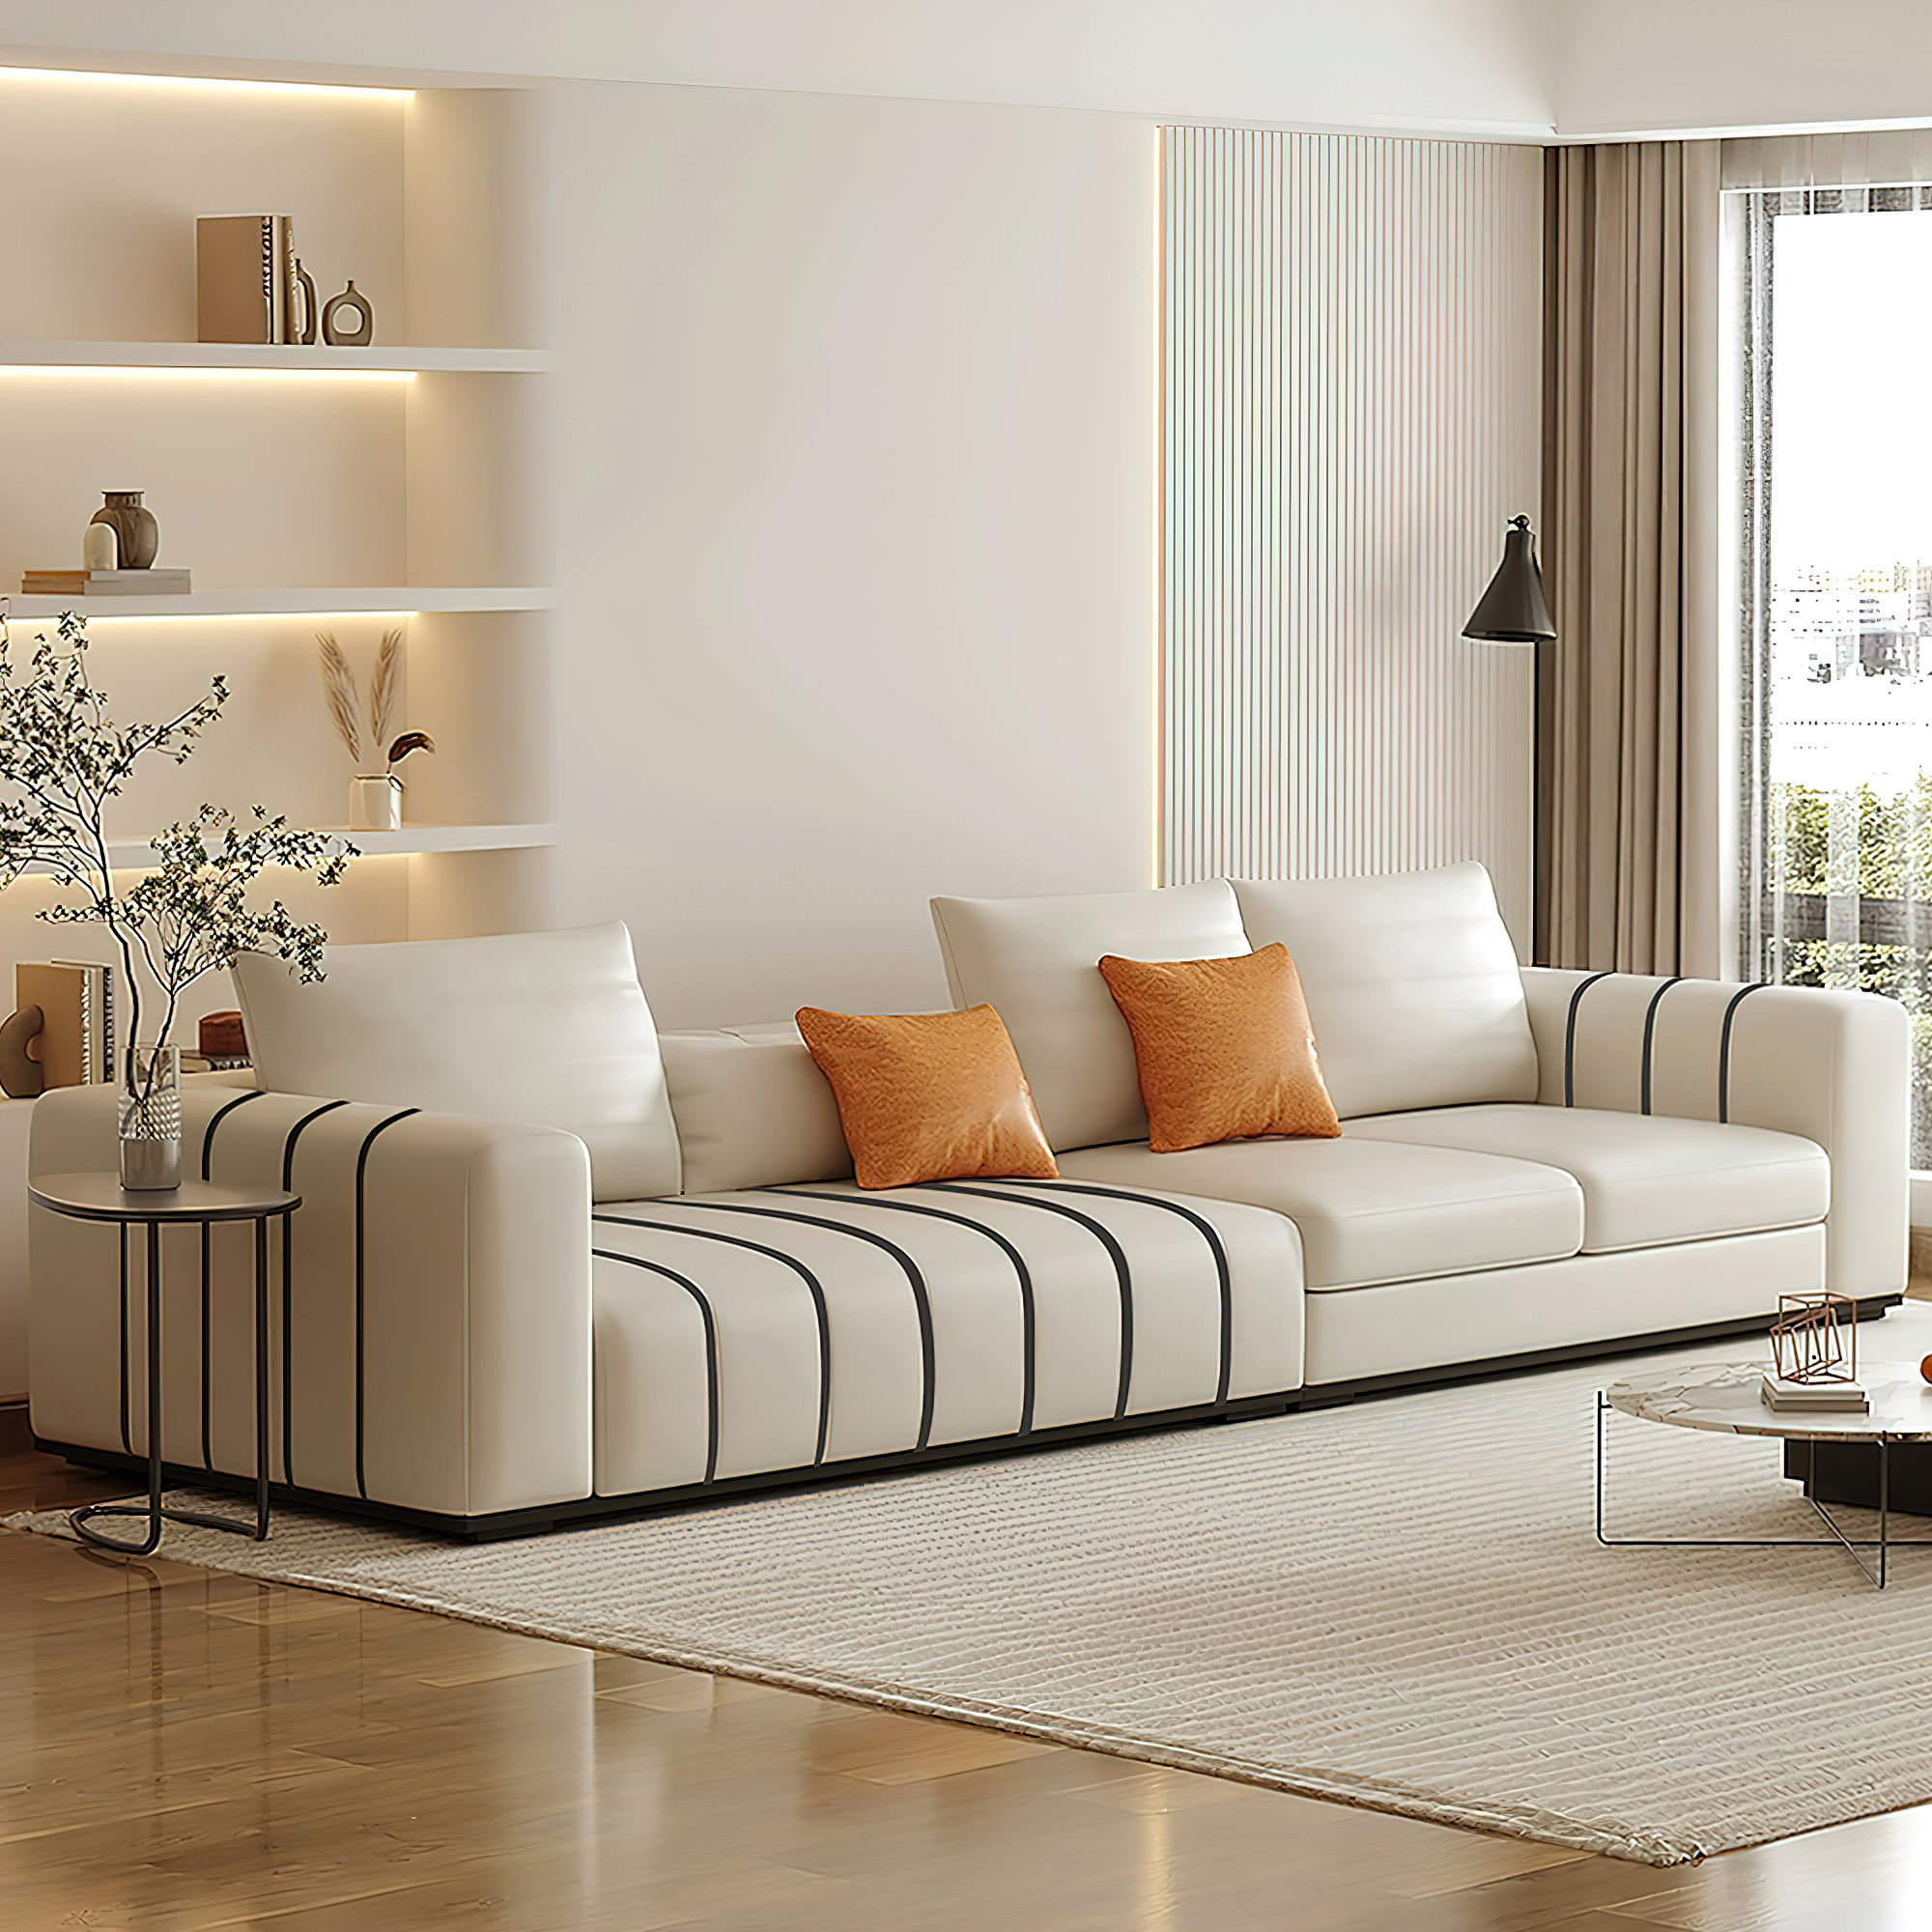 Living room sofa sets: Buy The Best Living Room Sofa Set and Bring Life To  Your Home - The Economic Times